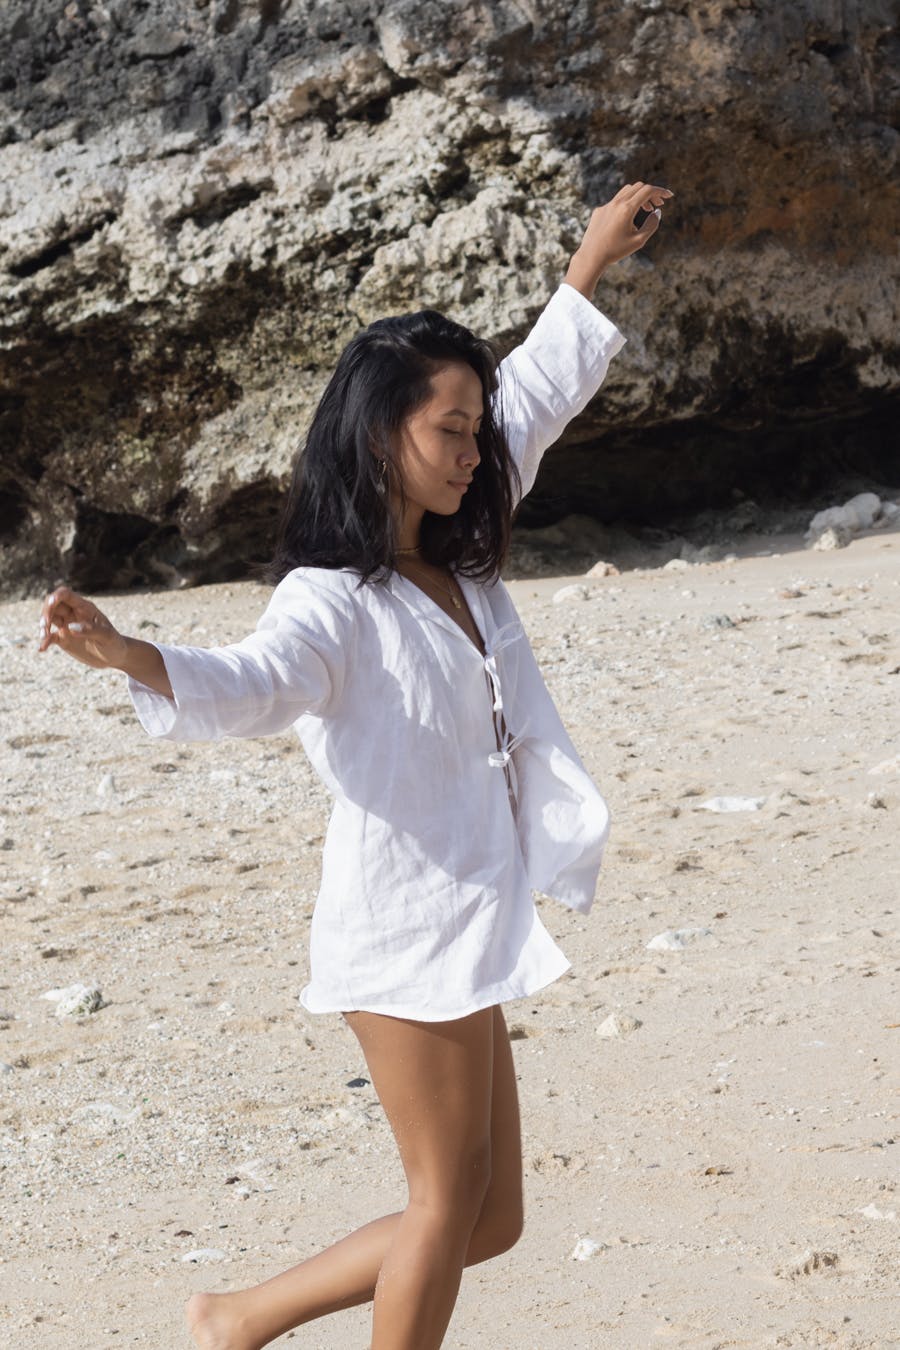 Girl dancing on beach with sustainable clothing